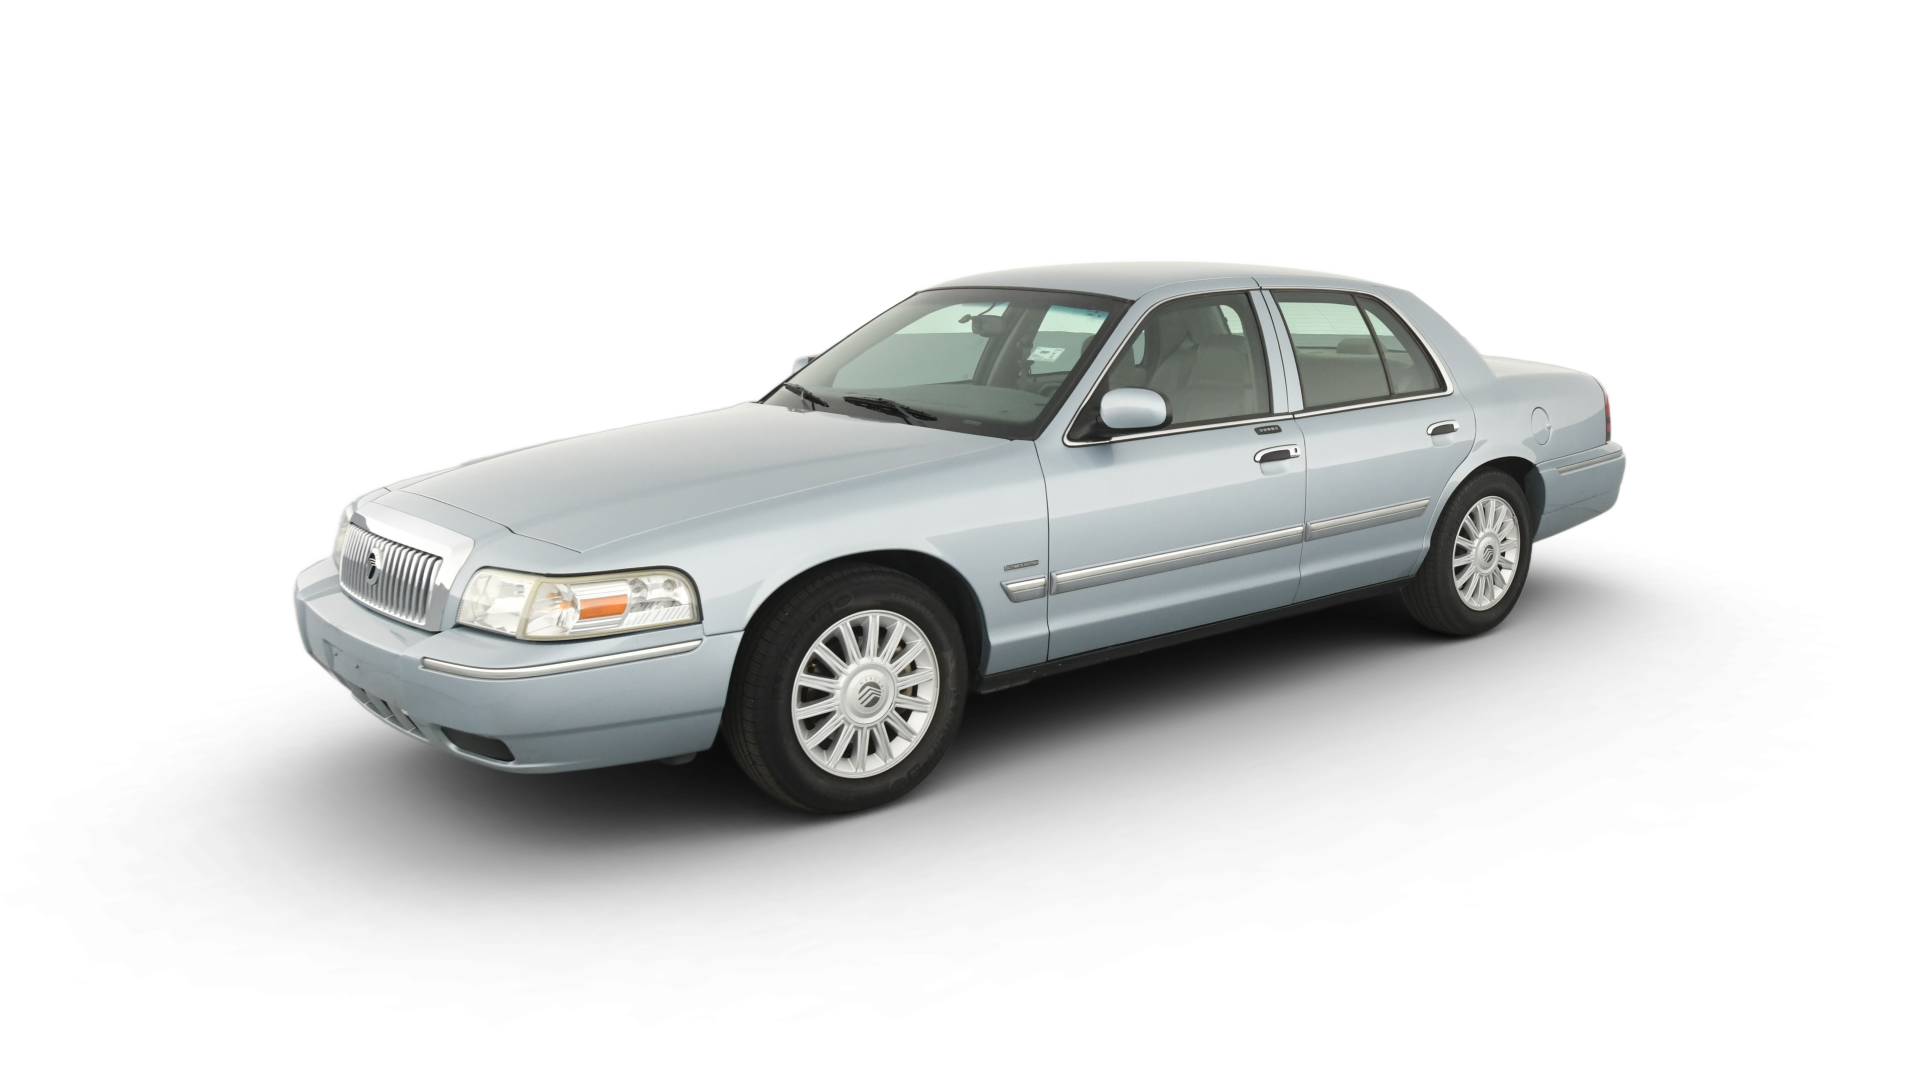 Used Mercury Grand Marquis LS For Sale Online | Carvana